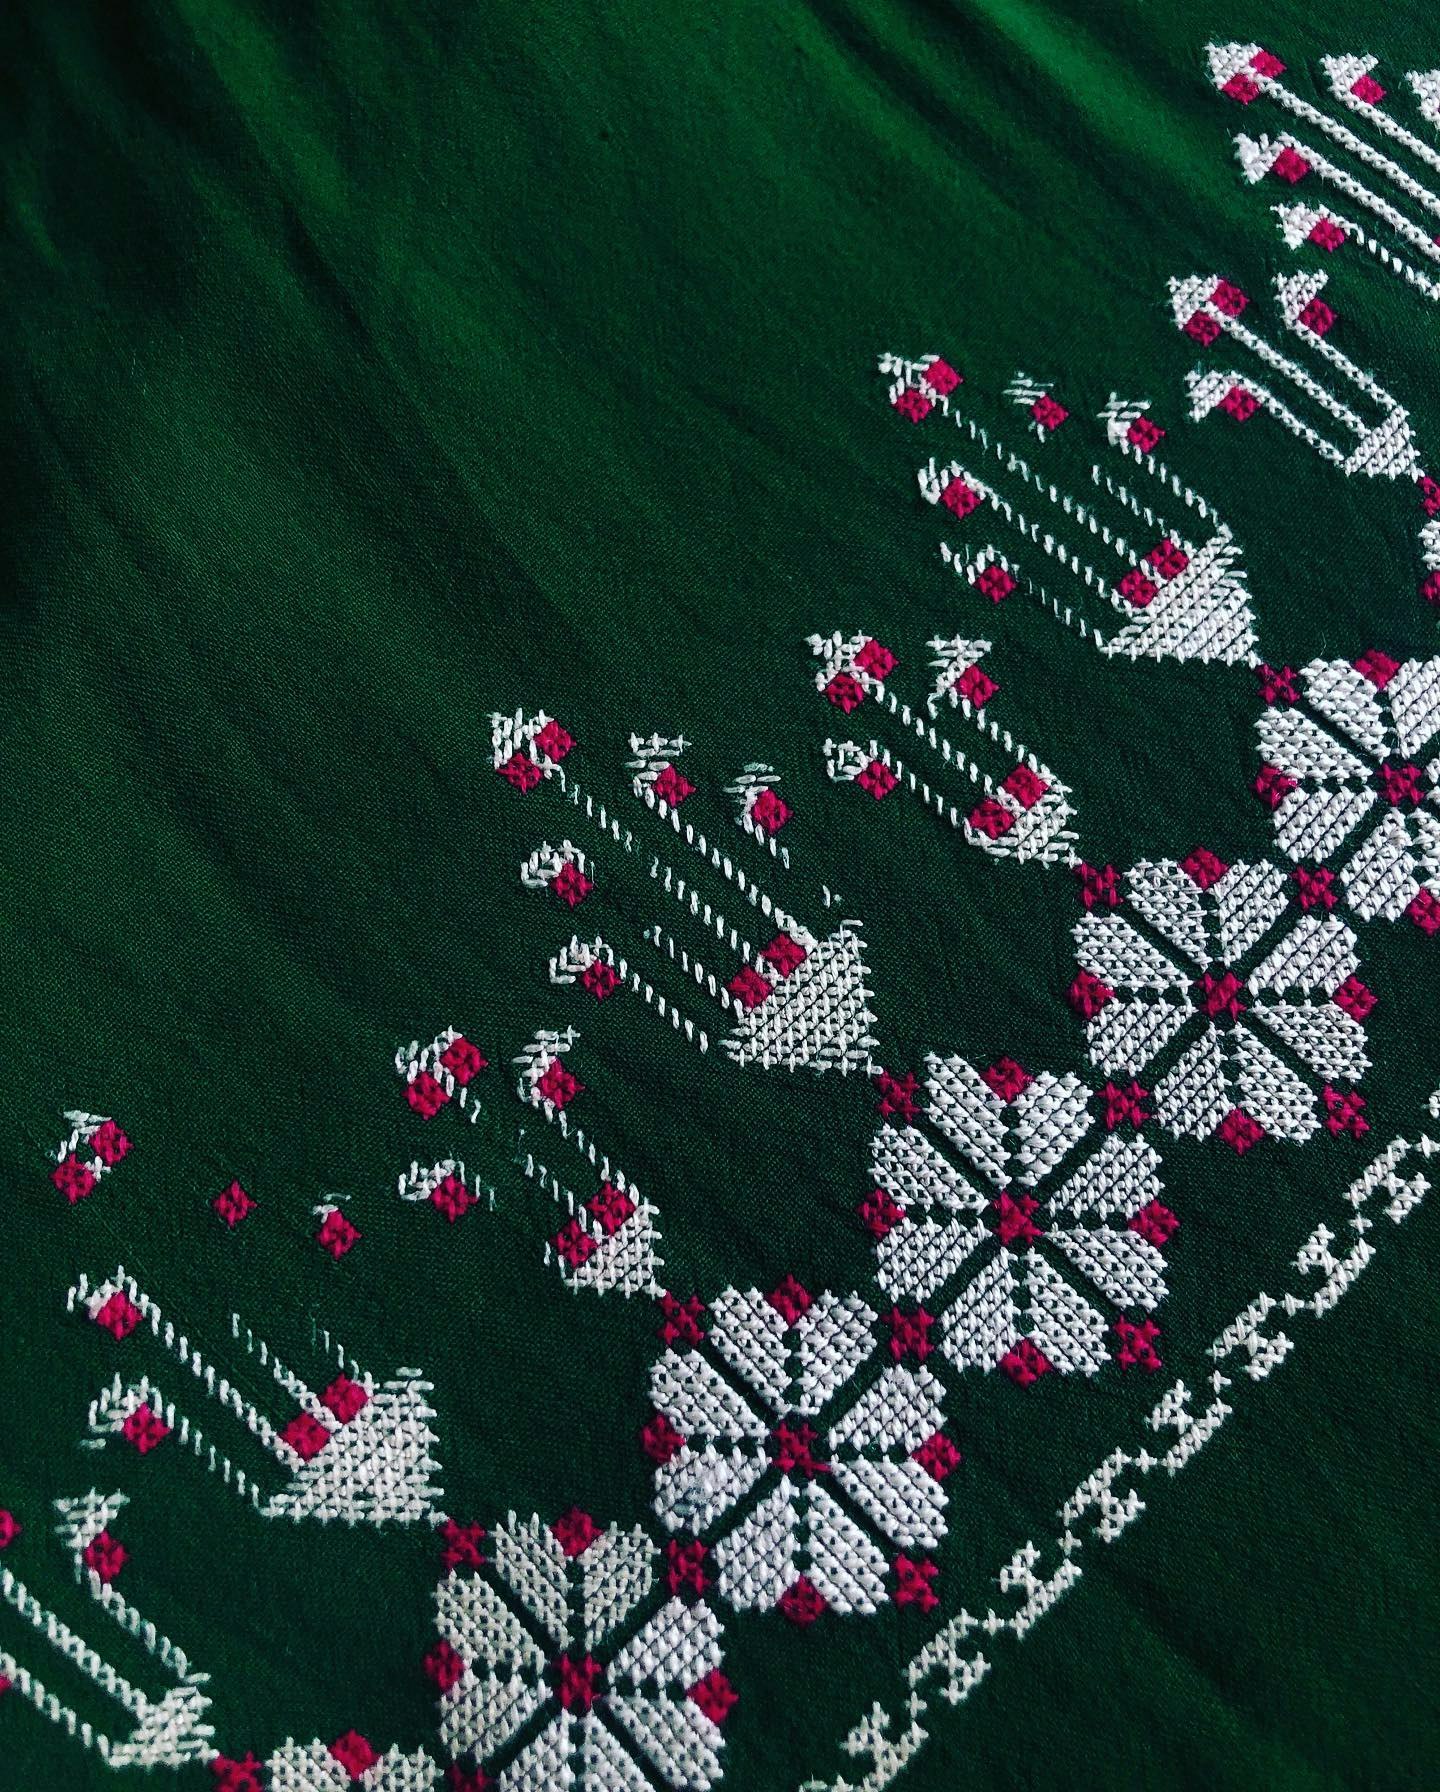 Let's celebrate the art of Hazara embroidery and honor Hazara women for preserving this indigenous art of embroidery, which is the living heritage of Hazara, transferred from mother to daughter throug